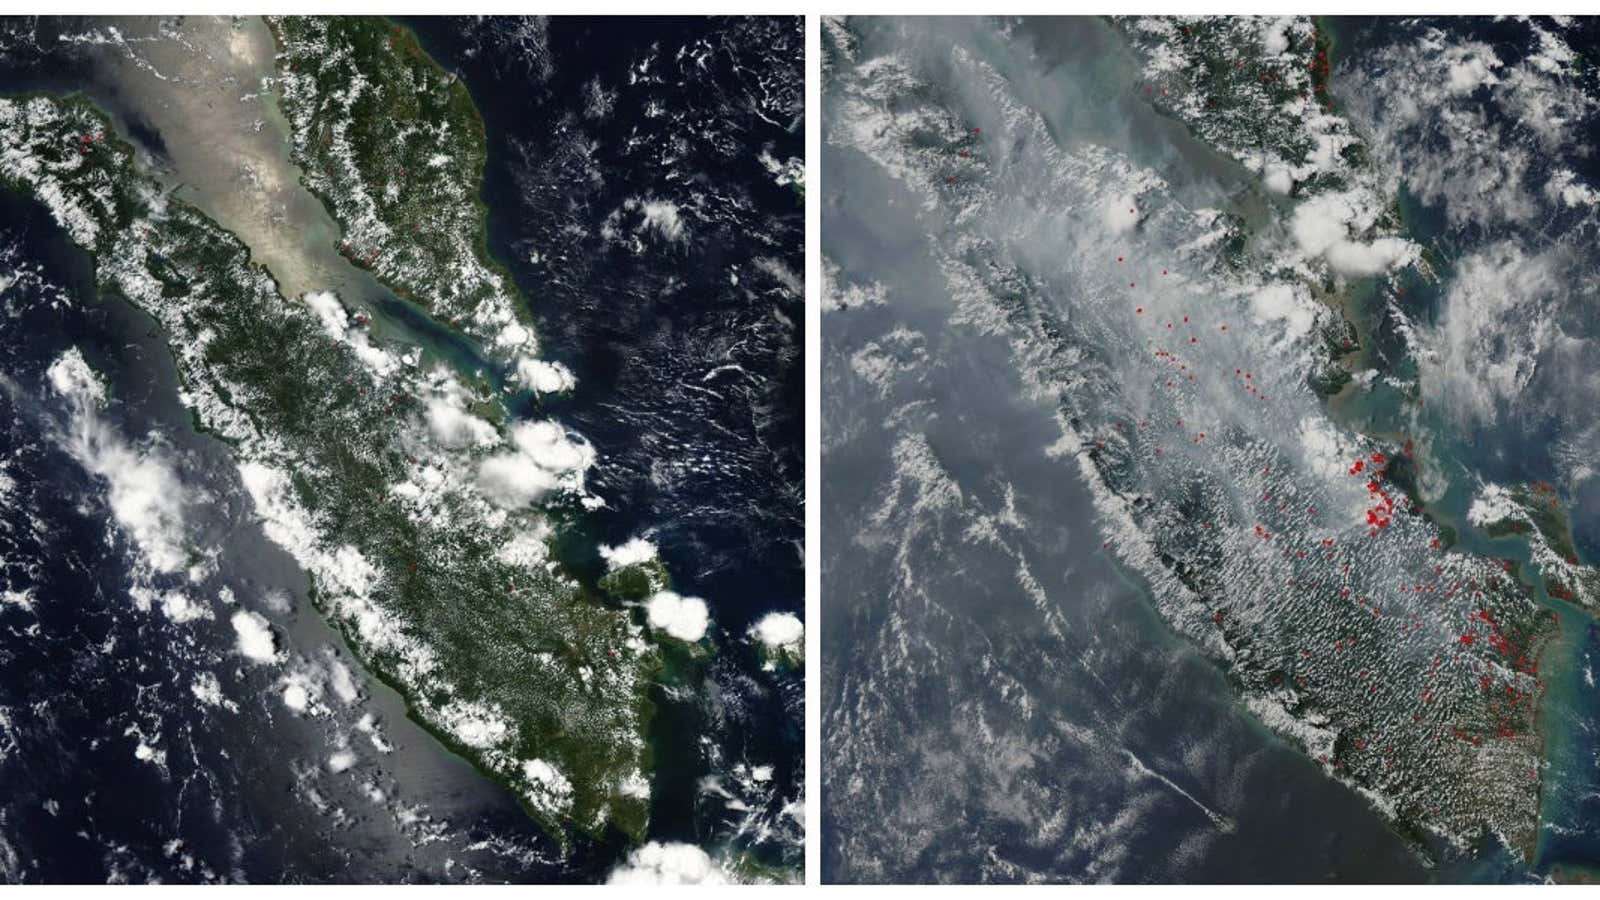 Sumatra from above on April 4 and Sept. 4 (right).